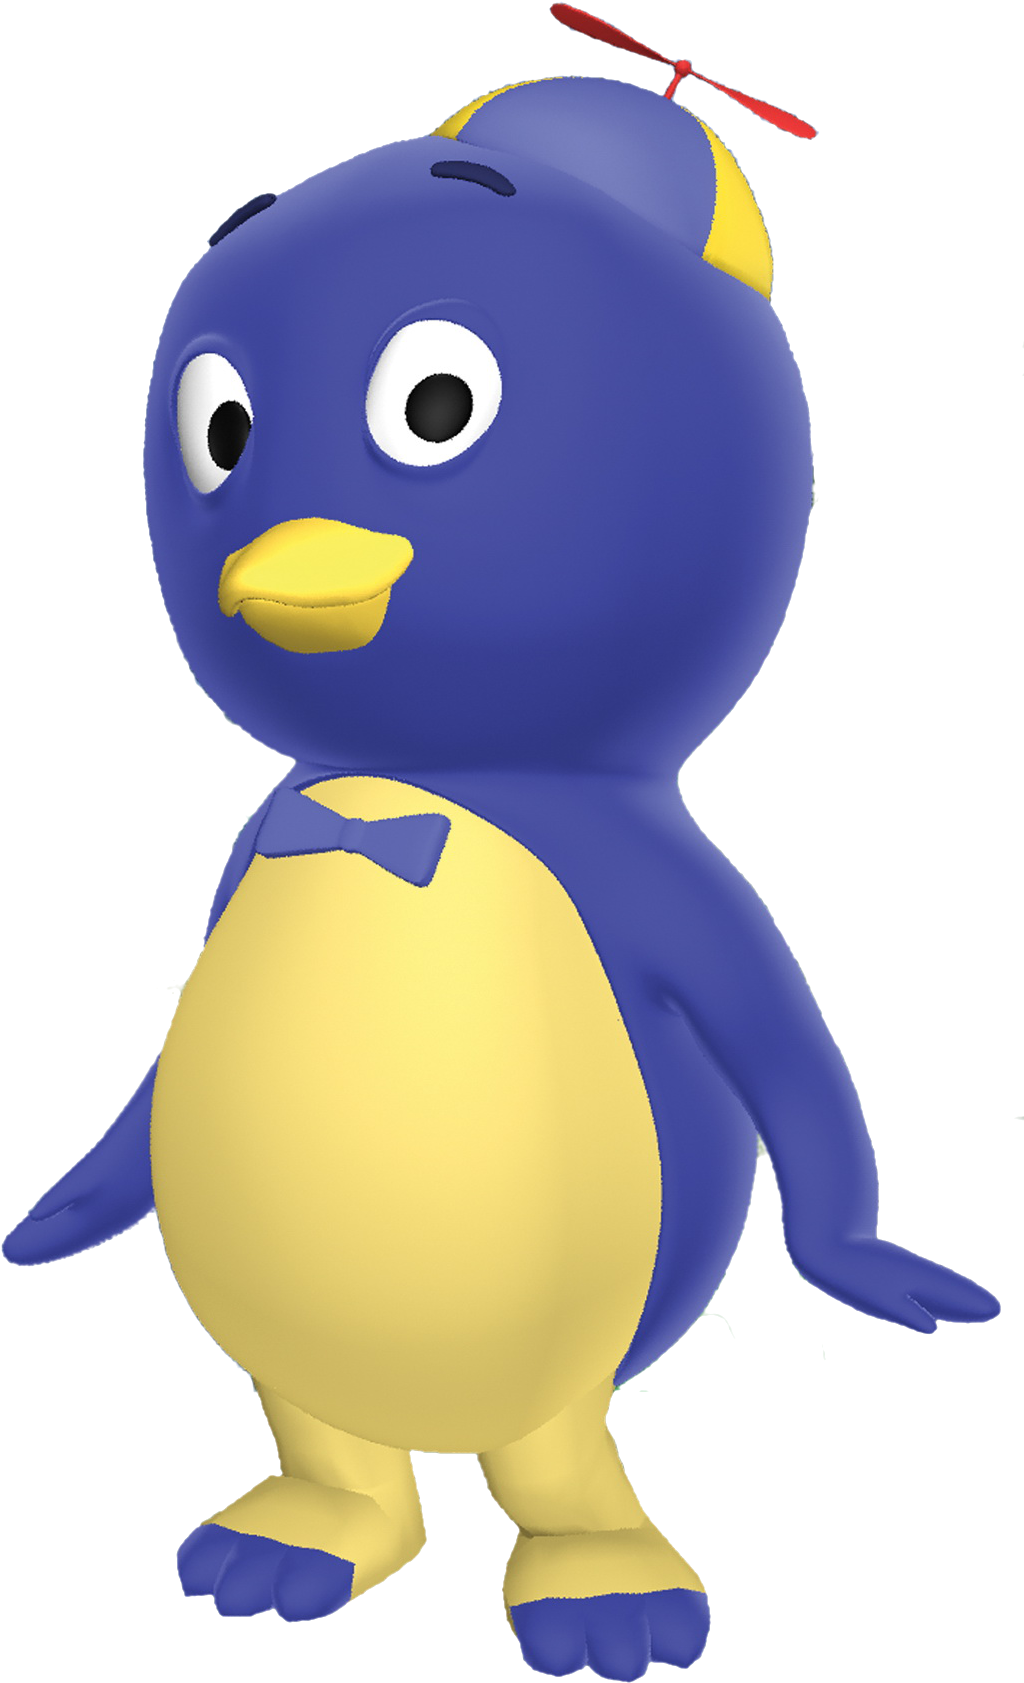 11 Best Quackable Es Images On Biscuit Cheese And - Backyardigans Characters (1033x1739)